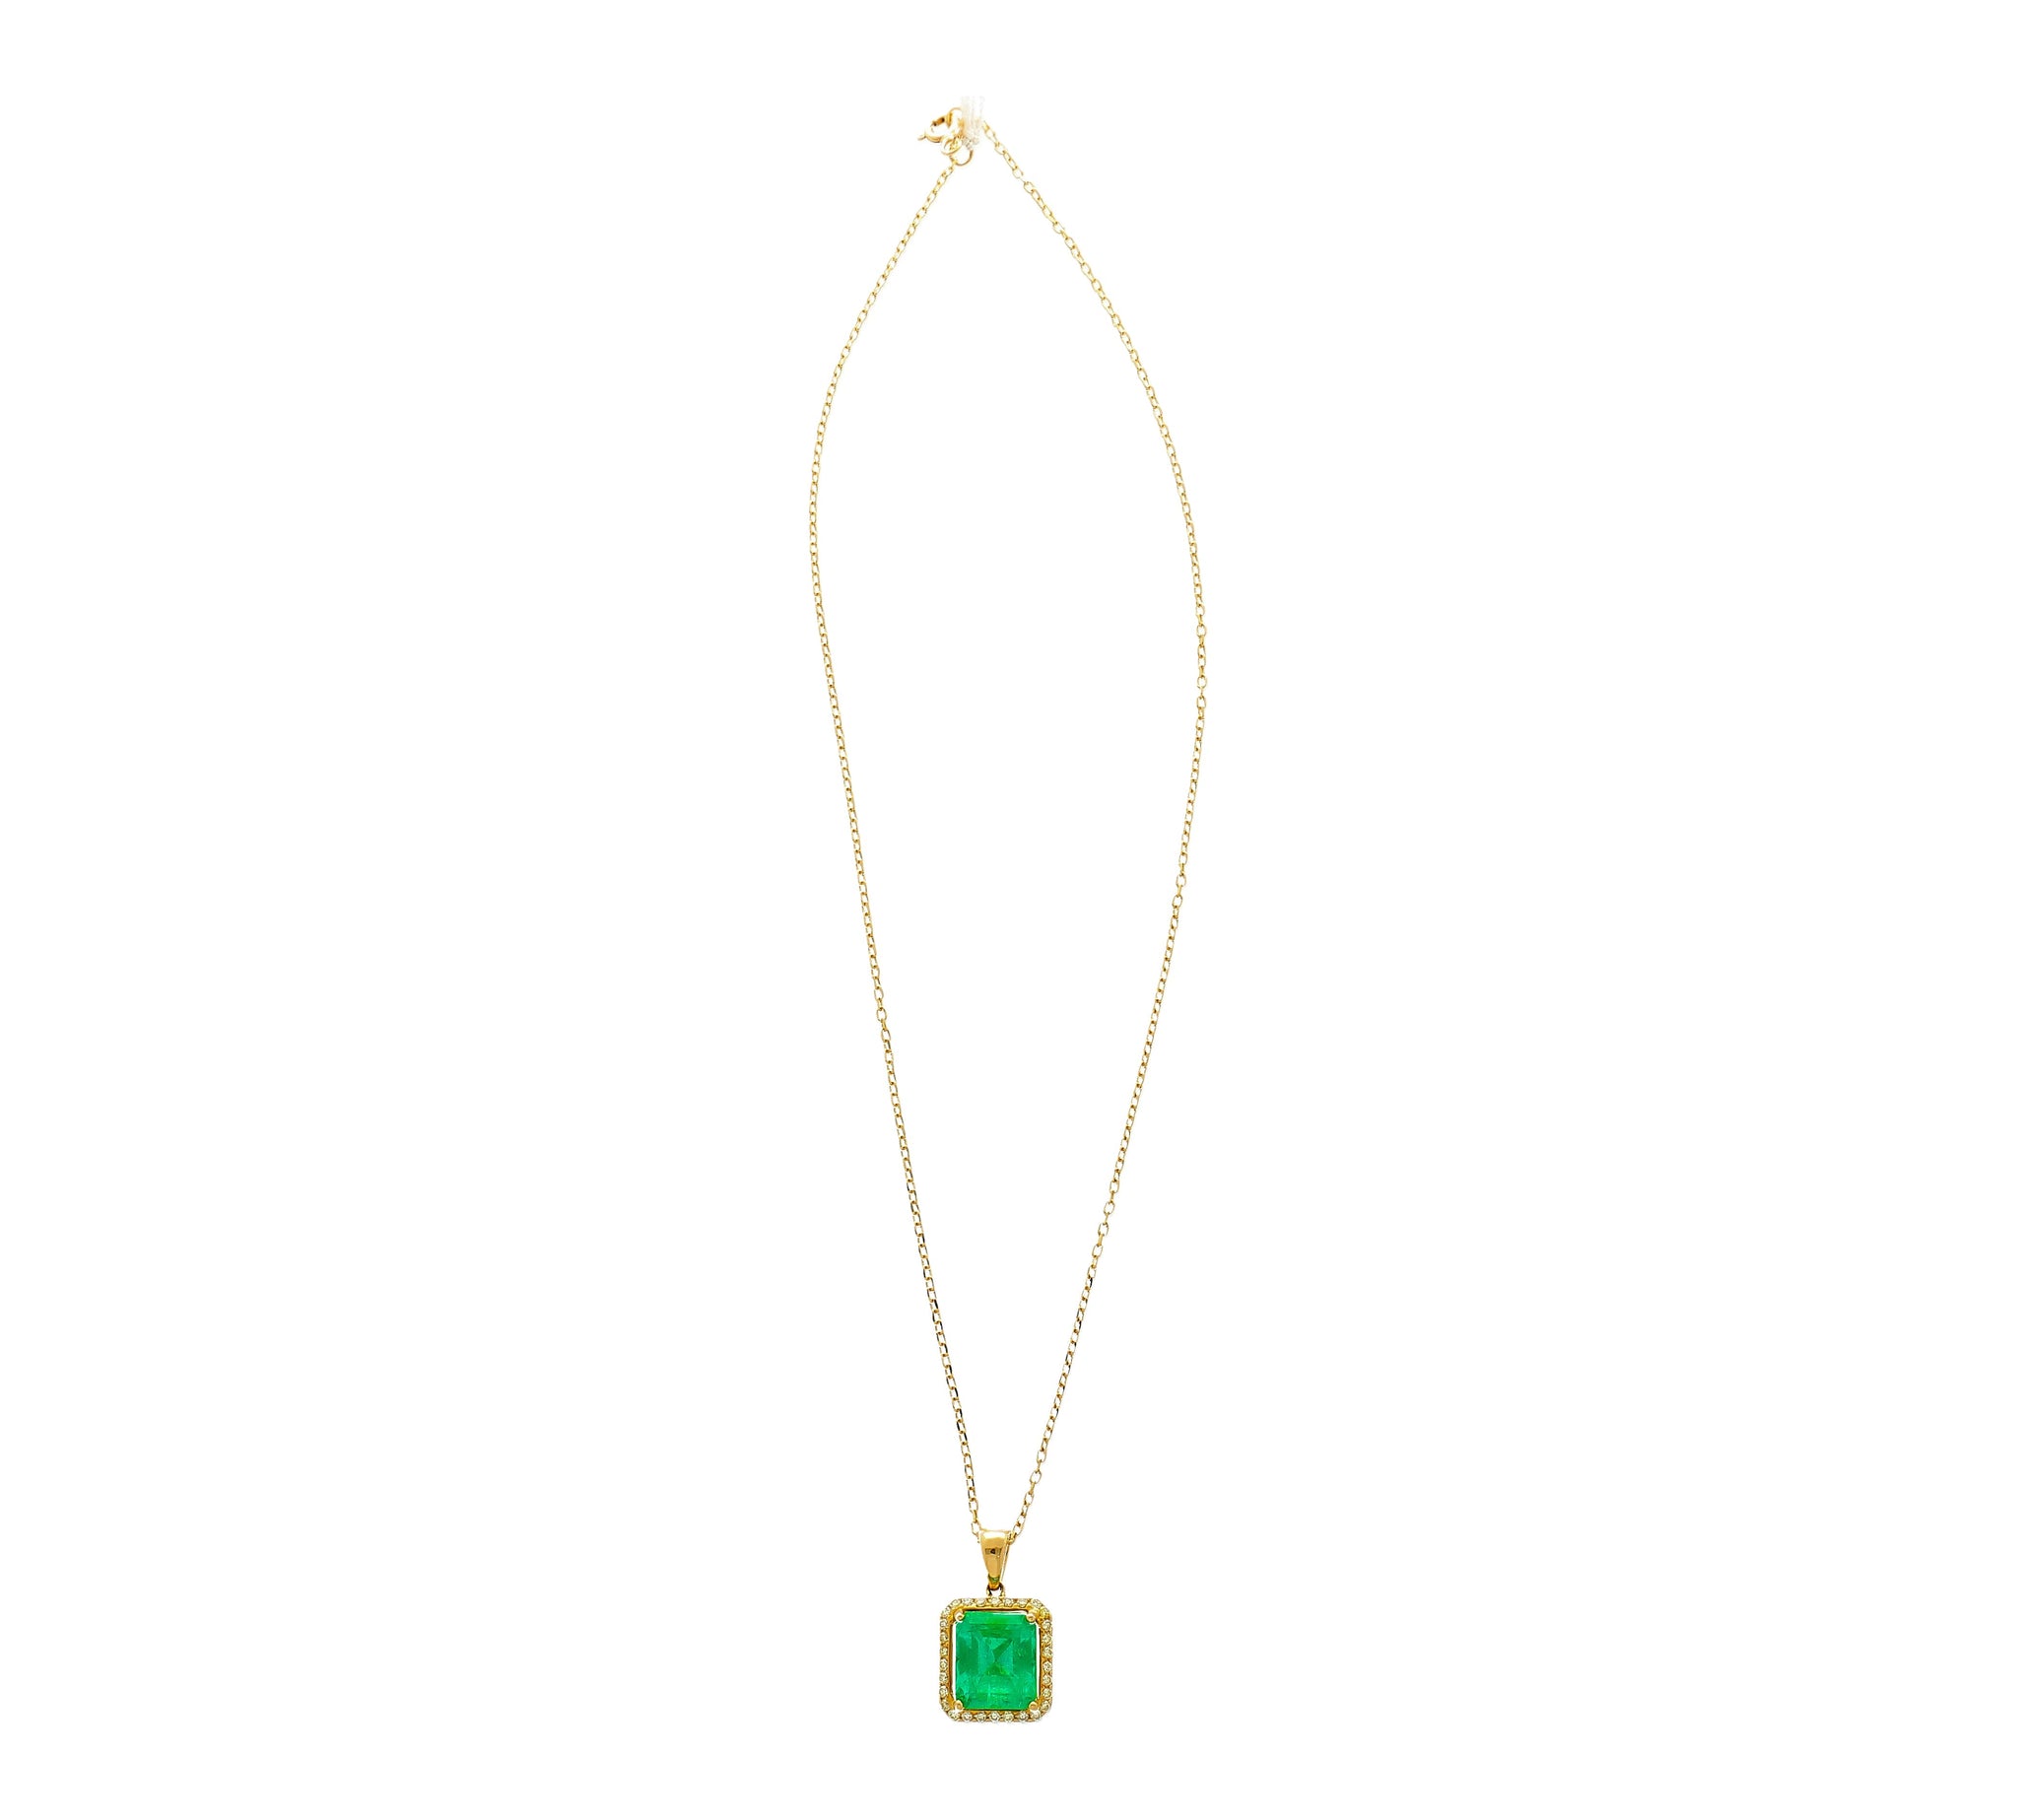 5.42 Carat Natural Emerald Pendant Necklace with Yellow Diamond Halo in 18k Gold